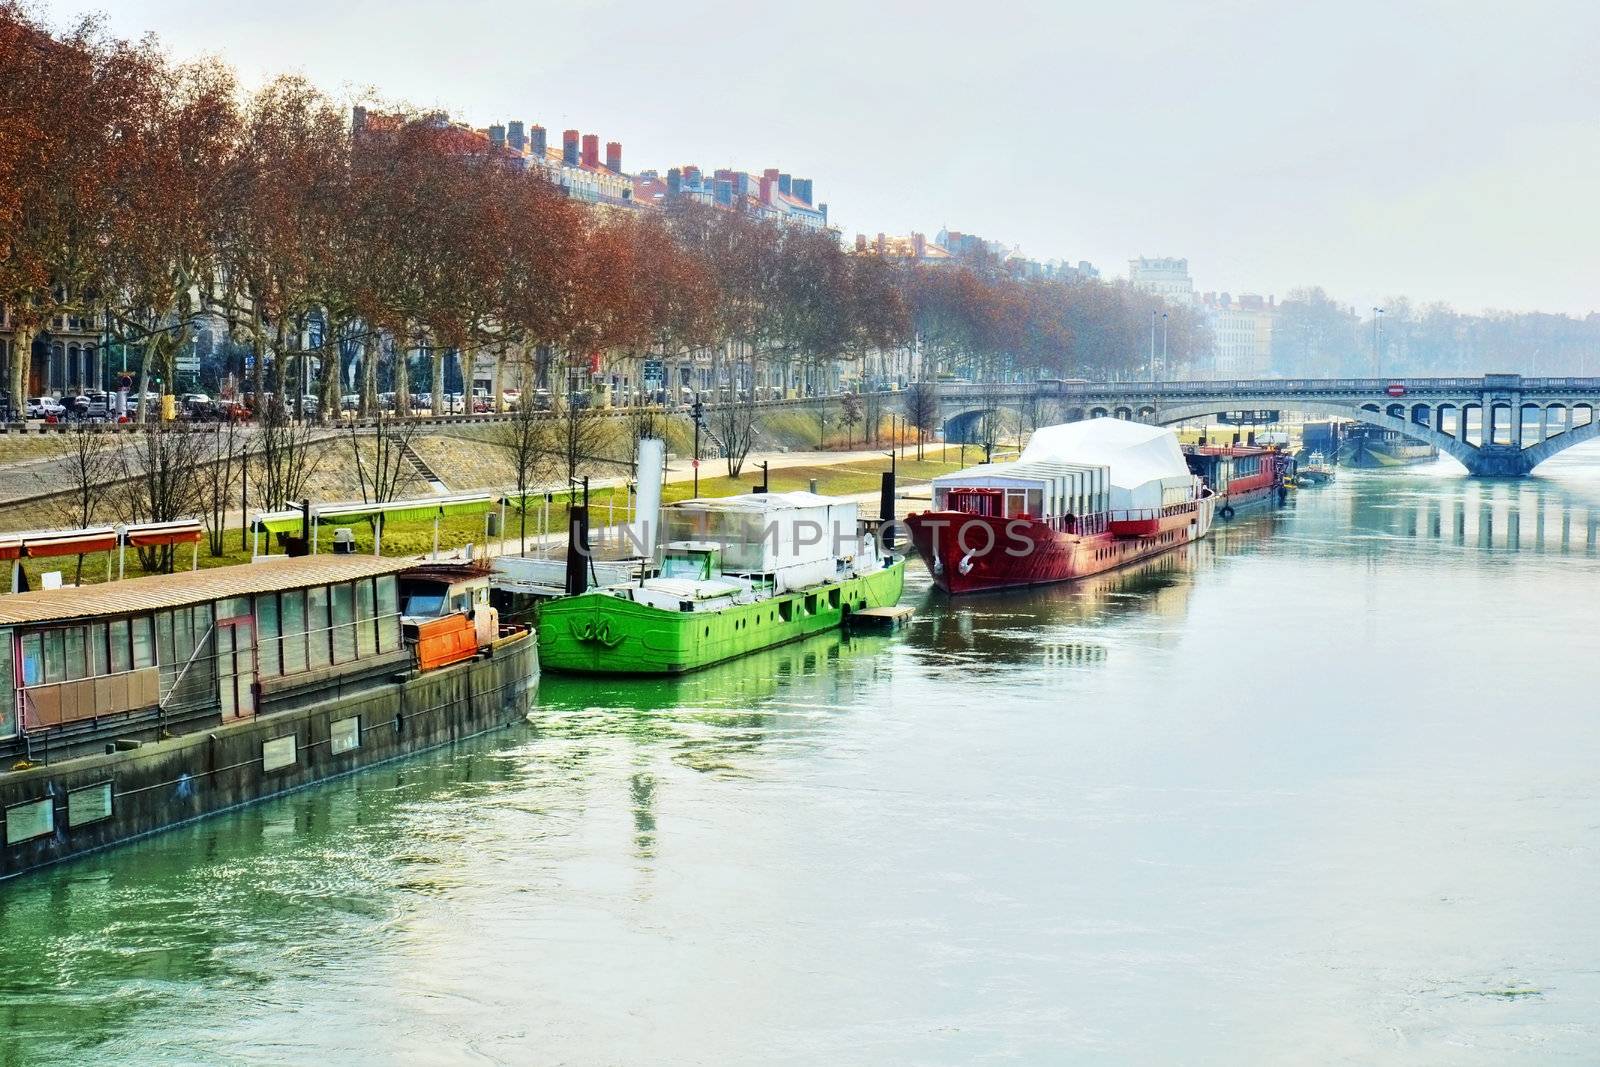 Damatic HDR rendering of a beautiful scene or landscape of houseboats or barges with their freight along the banks of the Rhone river, Lyon, France on a misty morning.